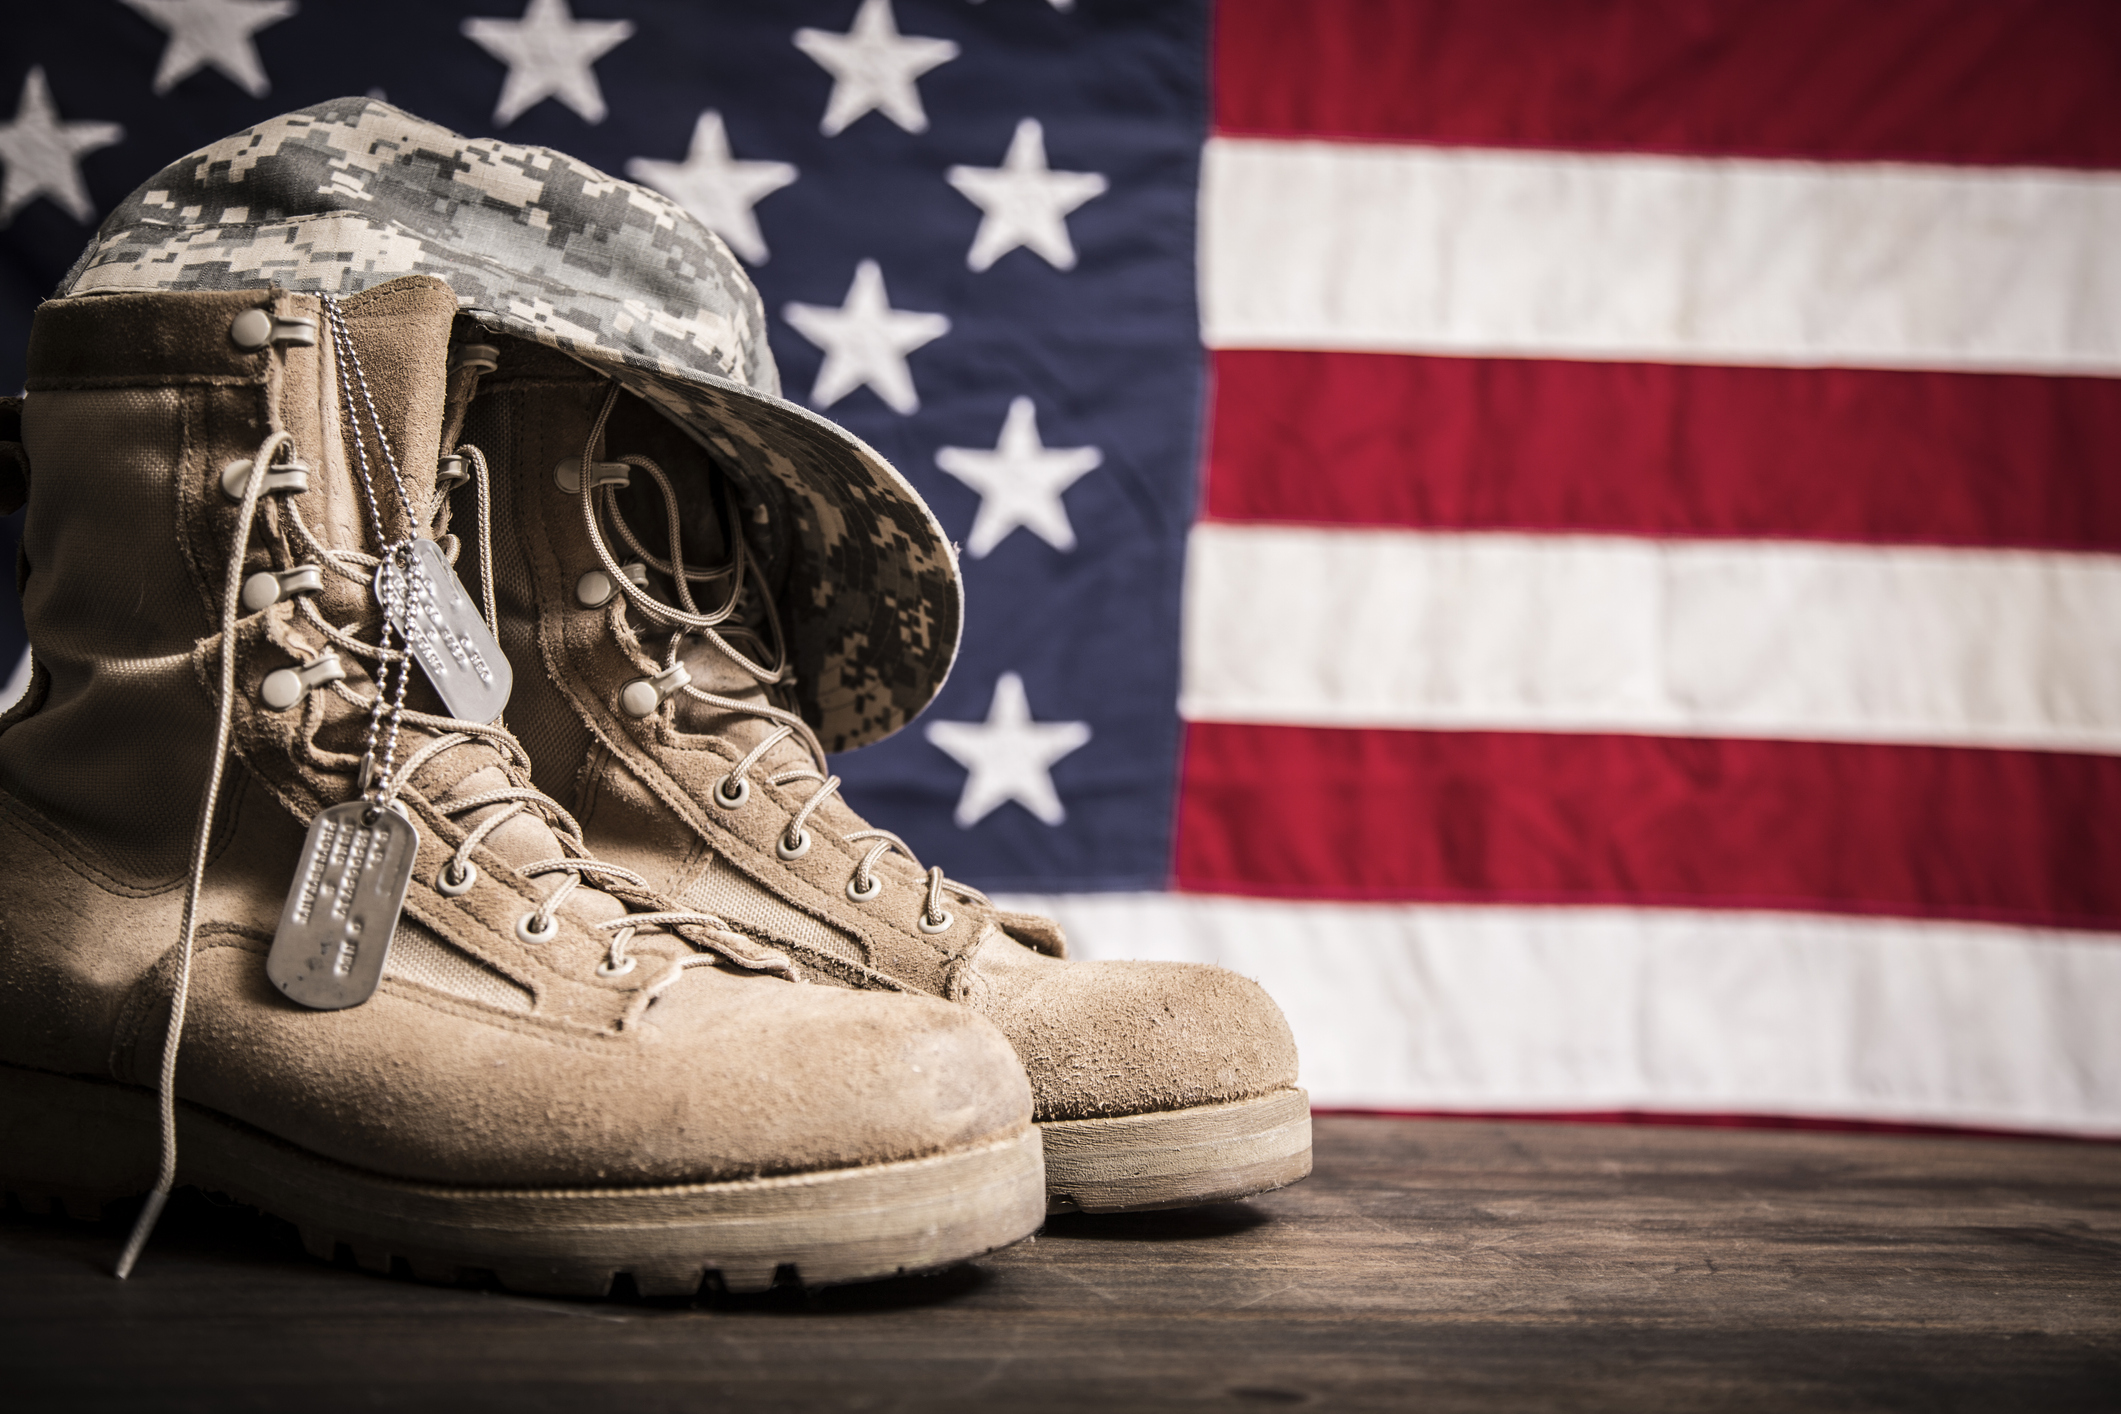 Military boots, hat, and dog tags in front of an American flag.